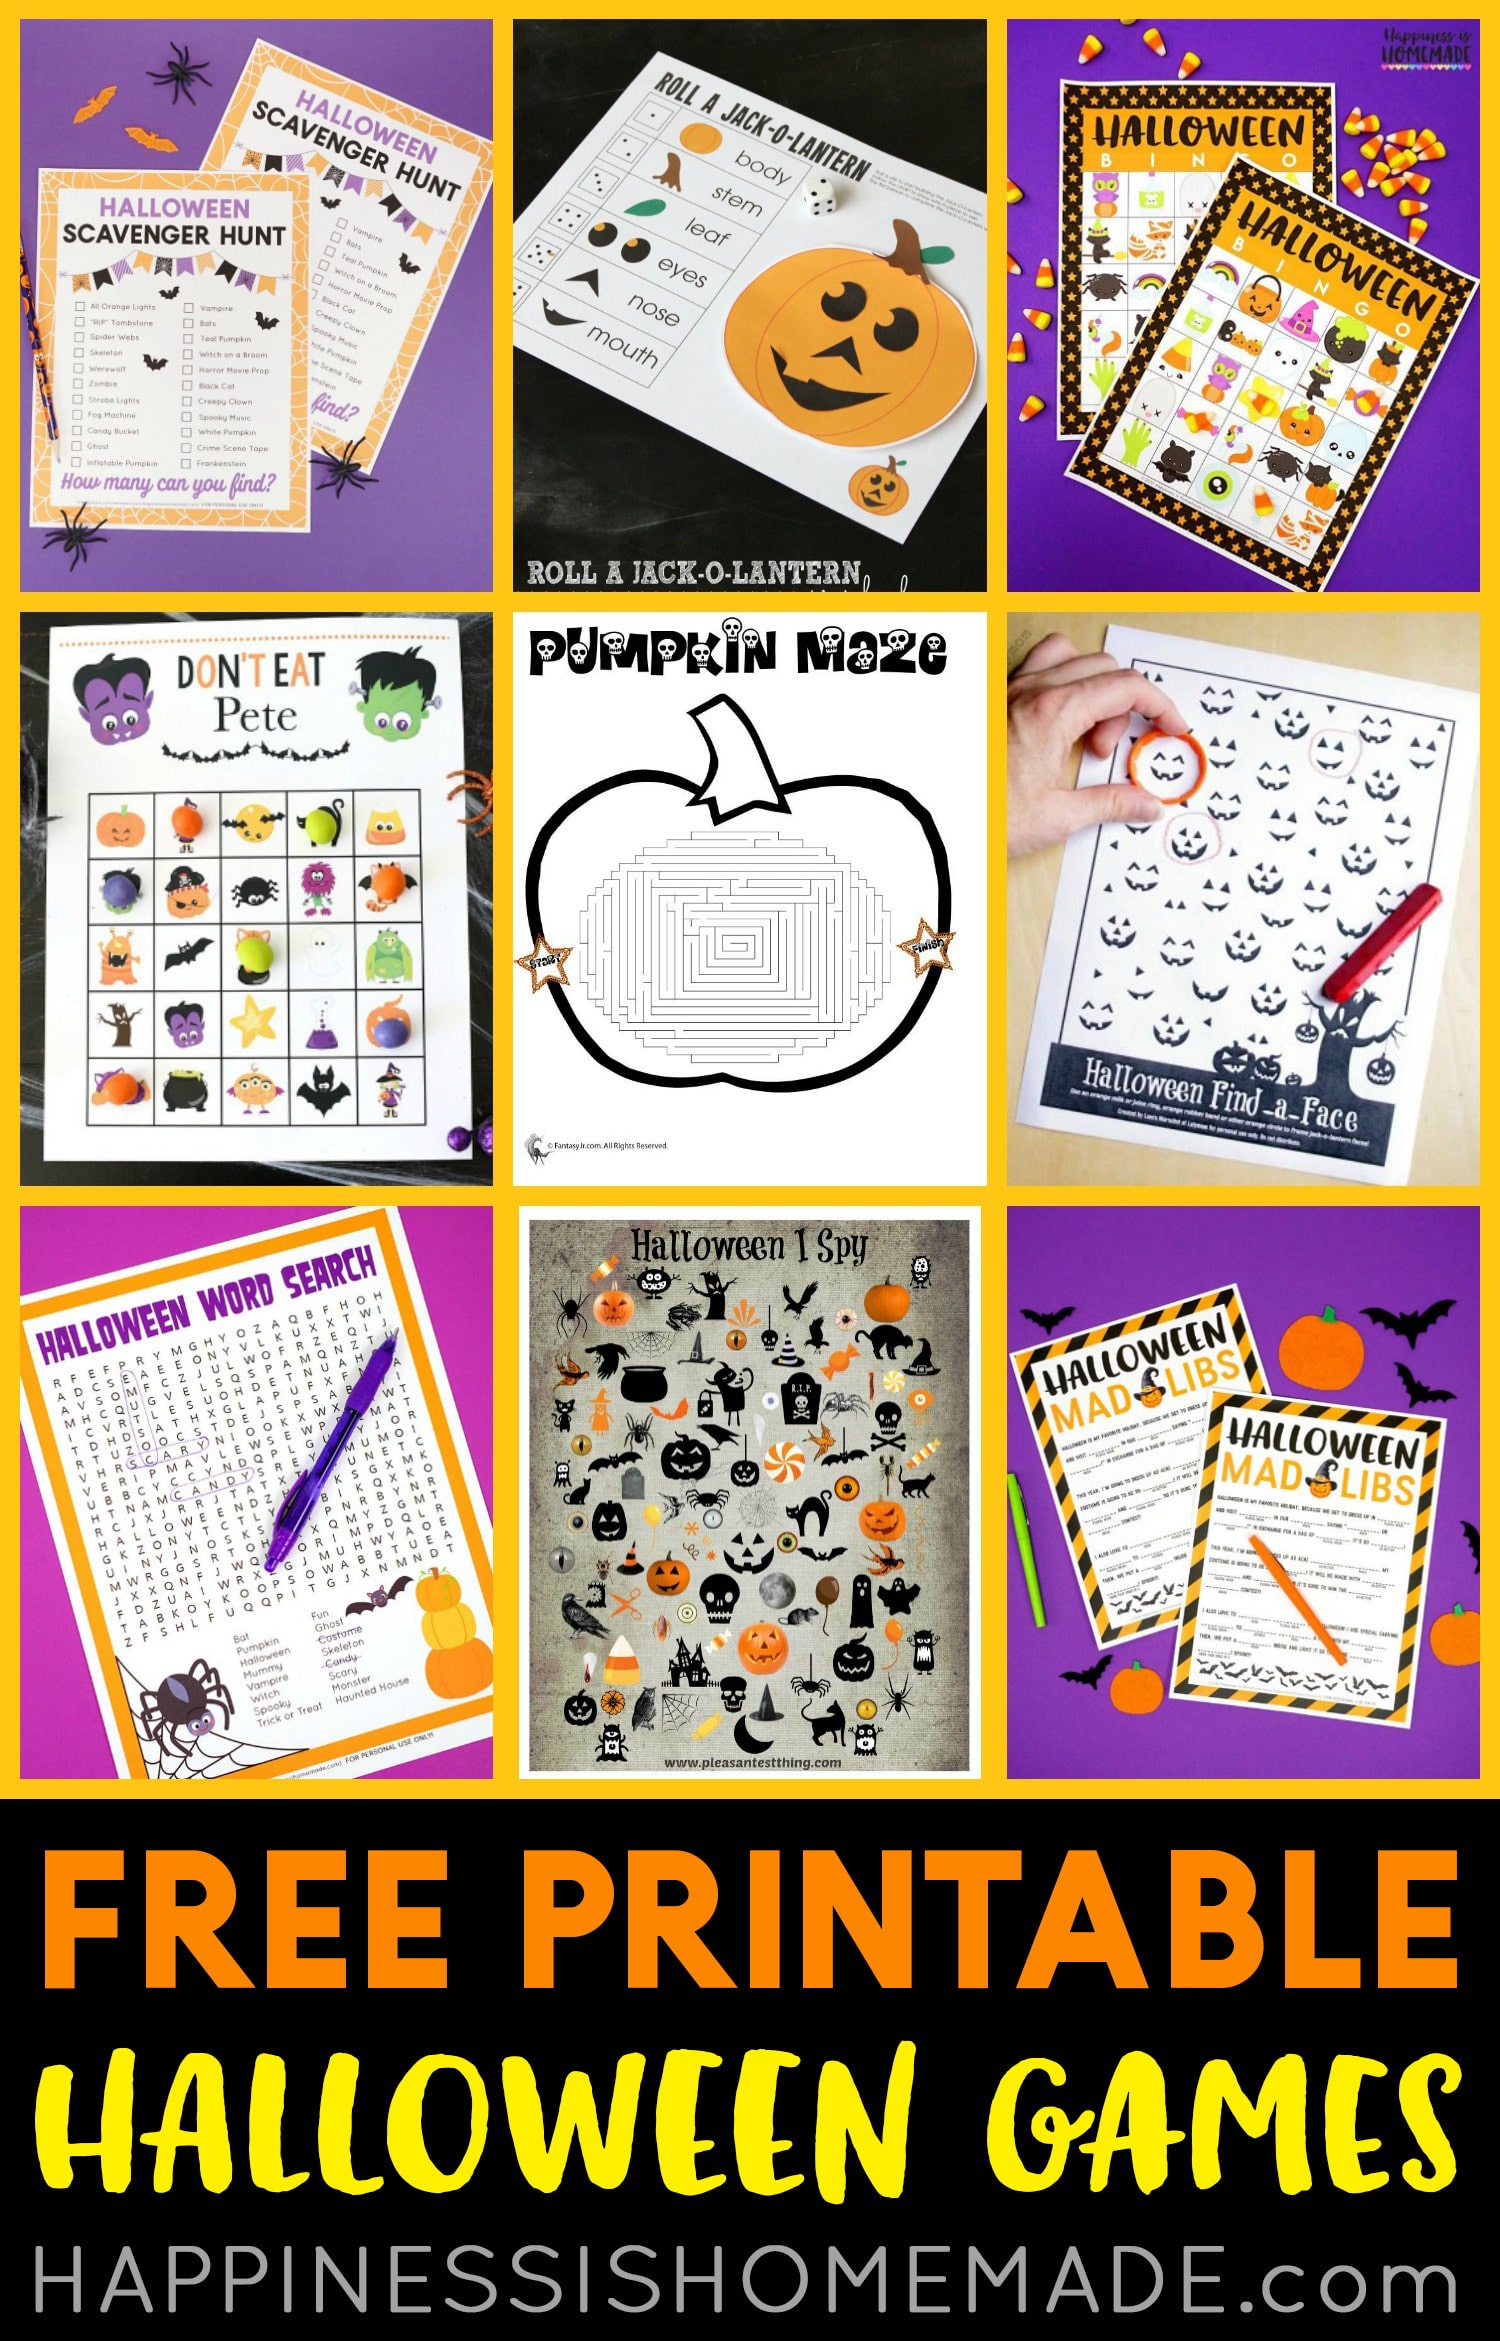 Free Printable Halloween Games - Happiness is Homemade